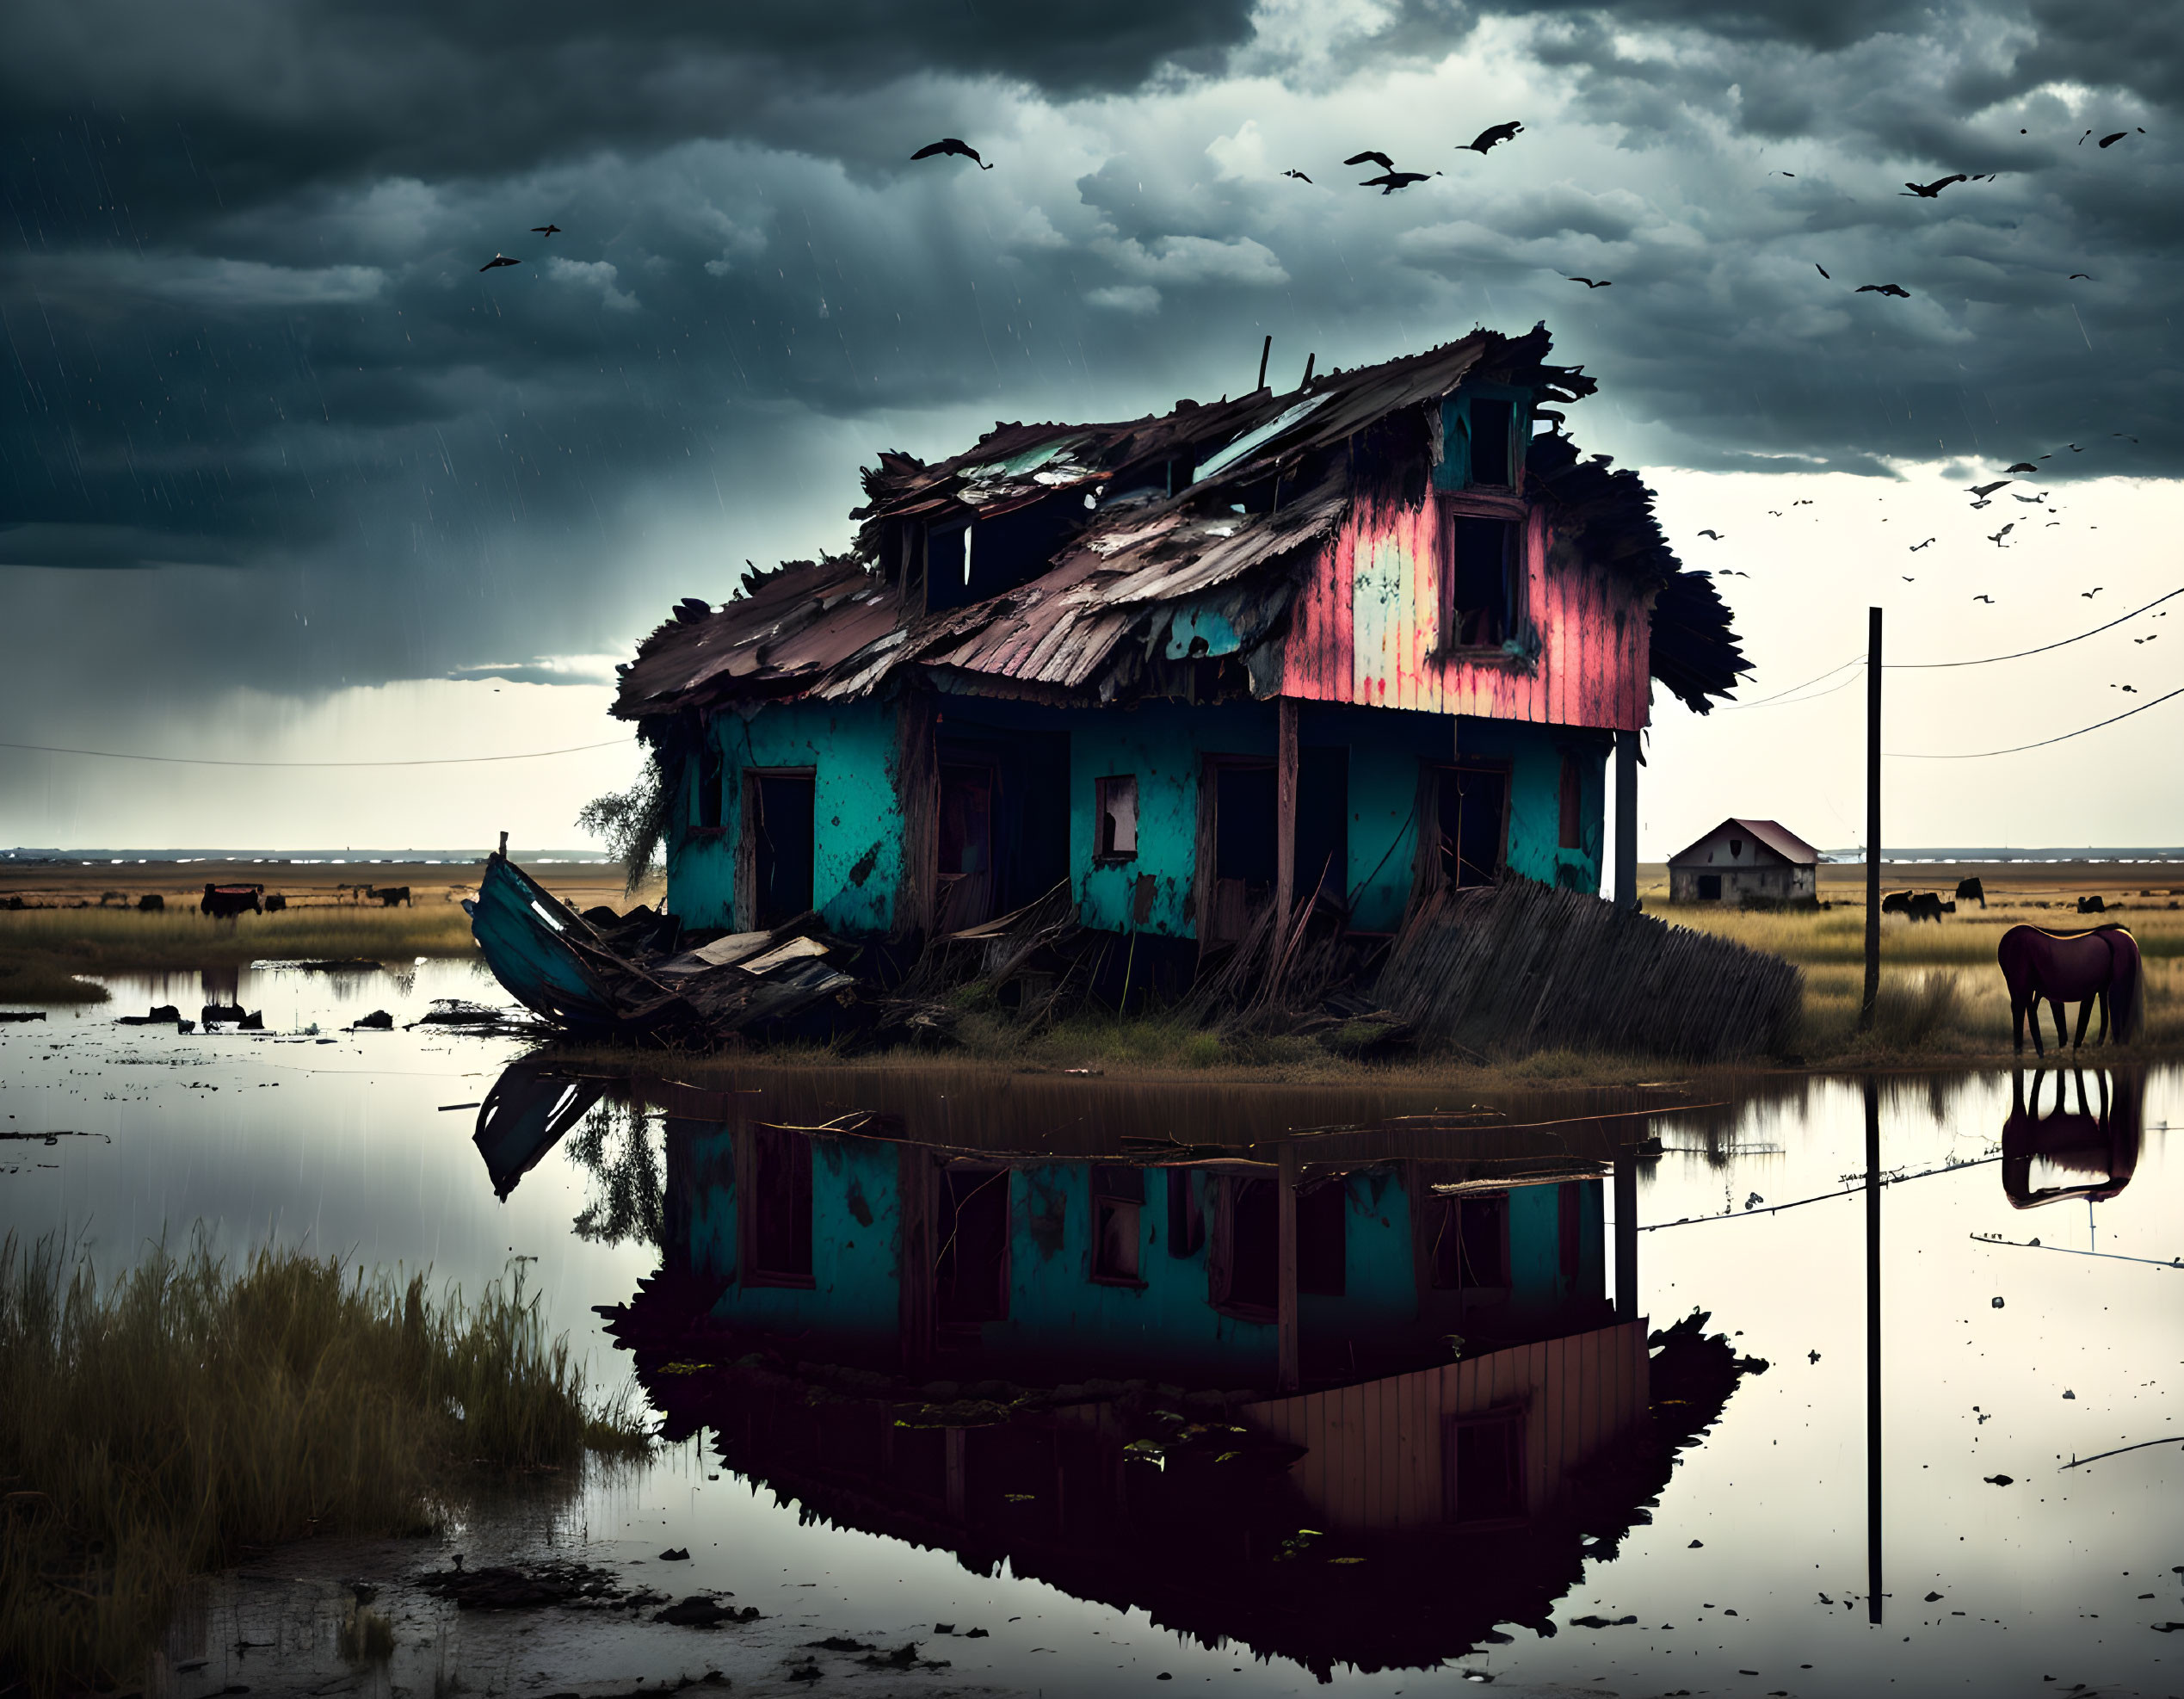 Abandoned two-story house with torn roof reflected in flood under stormy sky